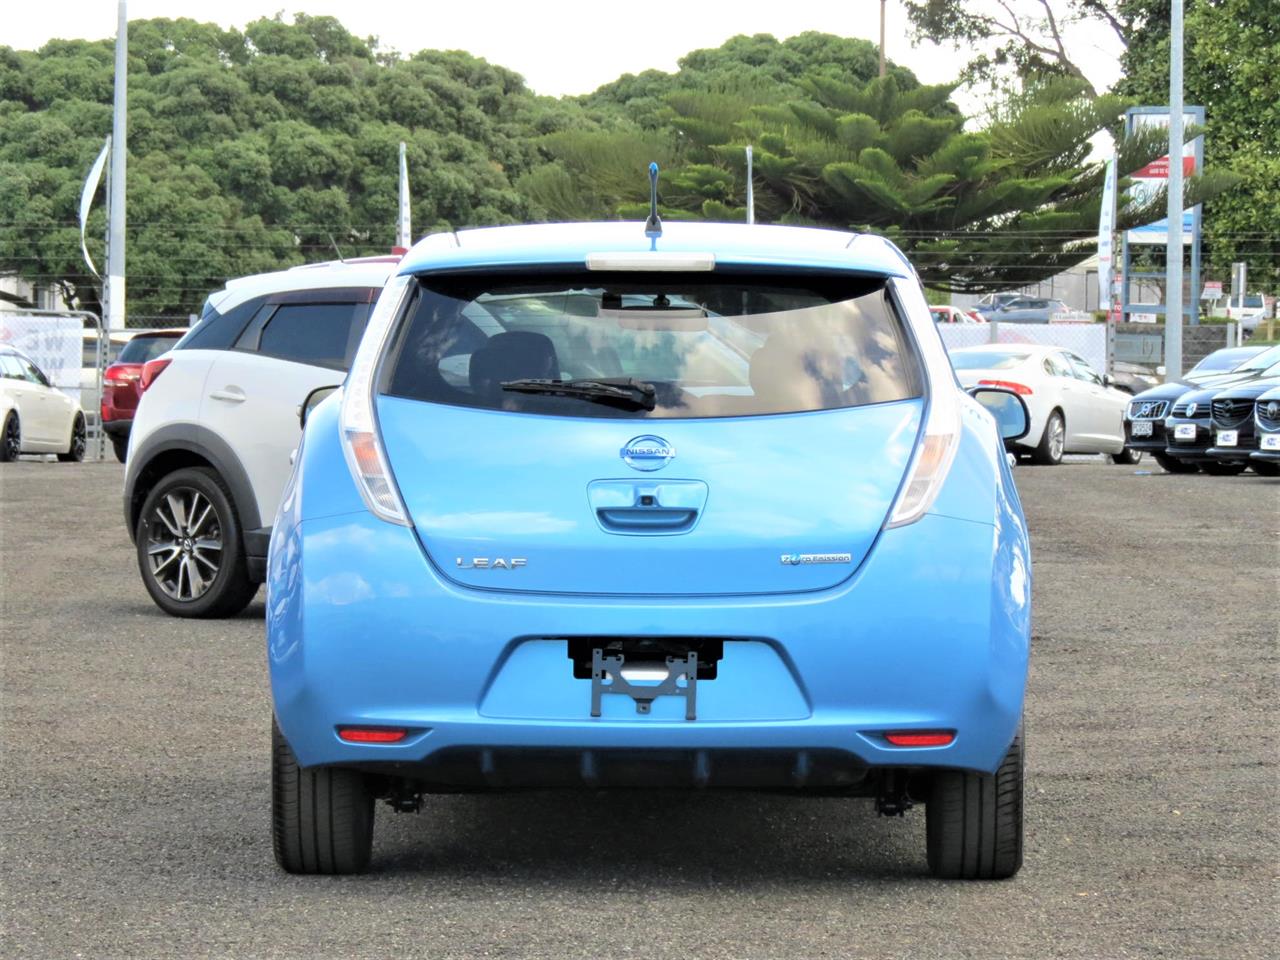 2012 Nissan Leaf only $42 weekly